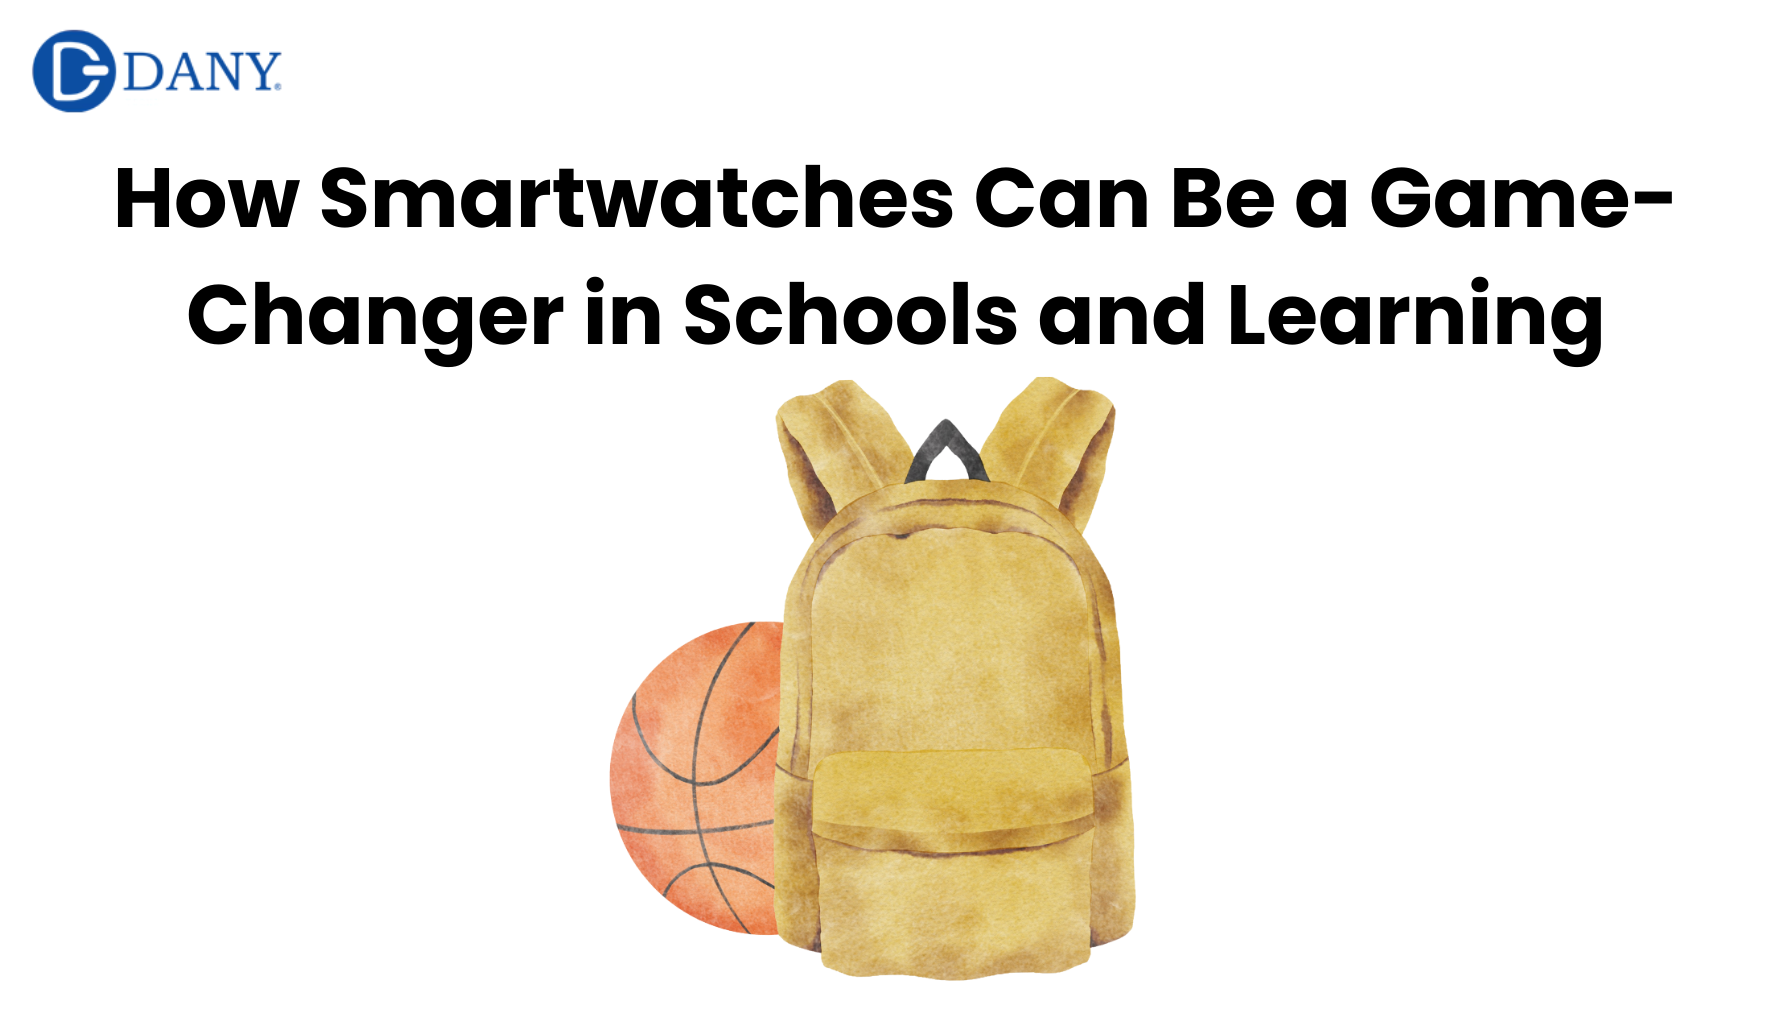 How Smartwatches Can Be a Game-Changer in Schools and Learning